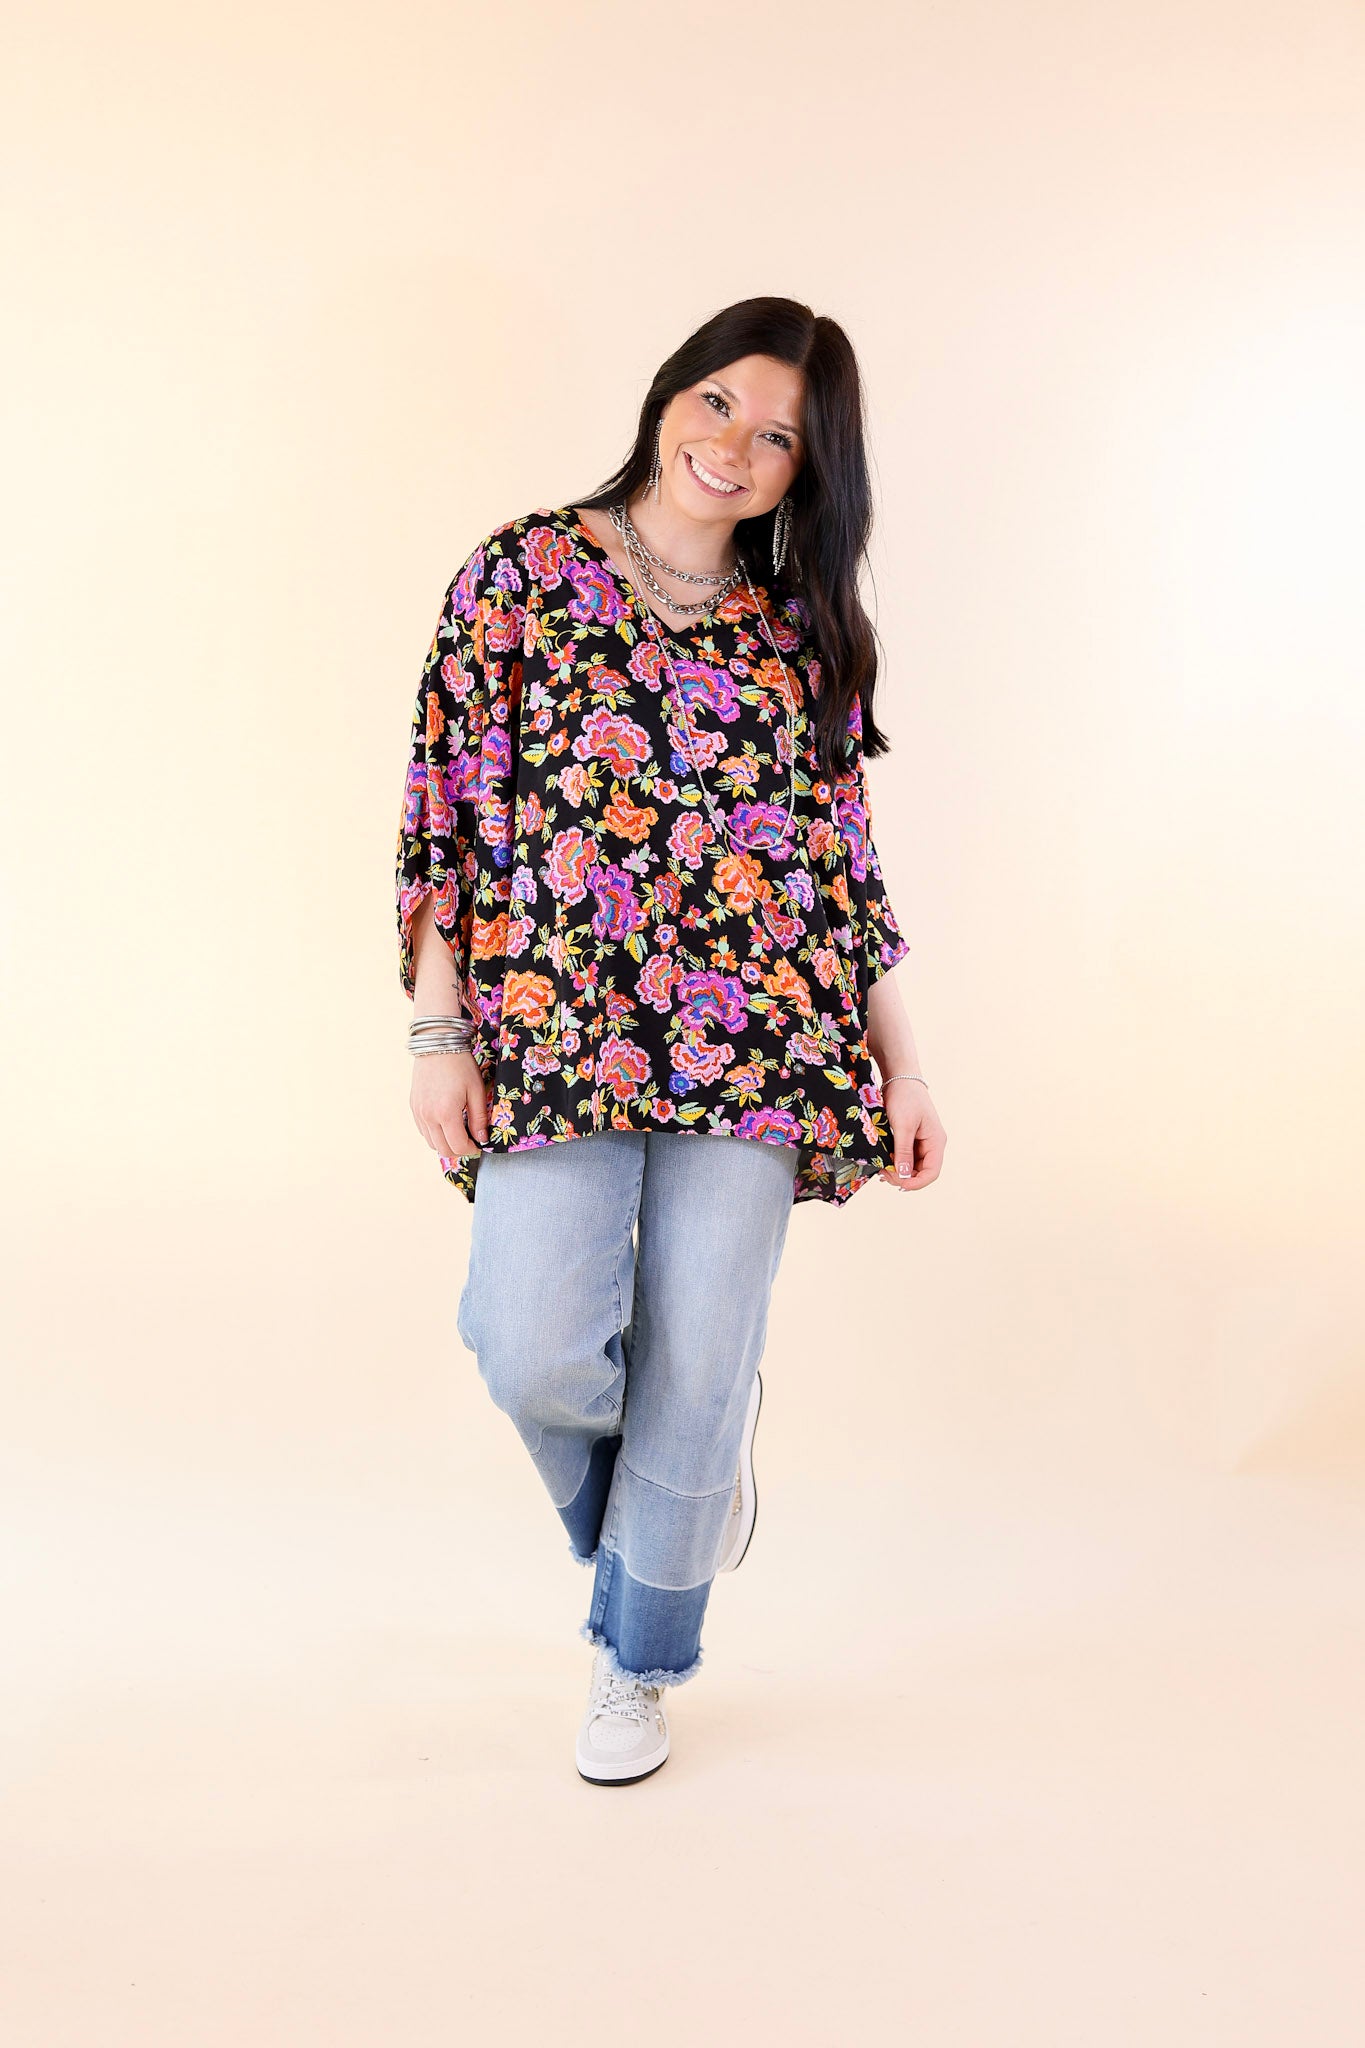 Boho Breeze Floral Print Poncho Top in Black - Giddy Up Glamour Boutique